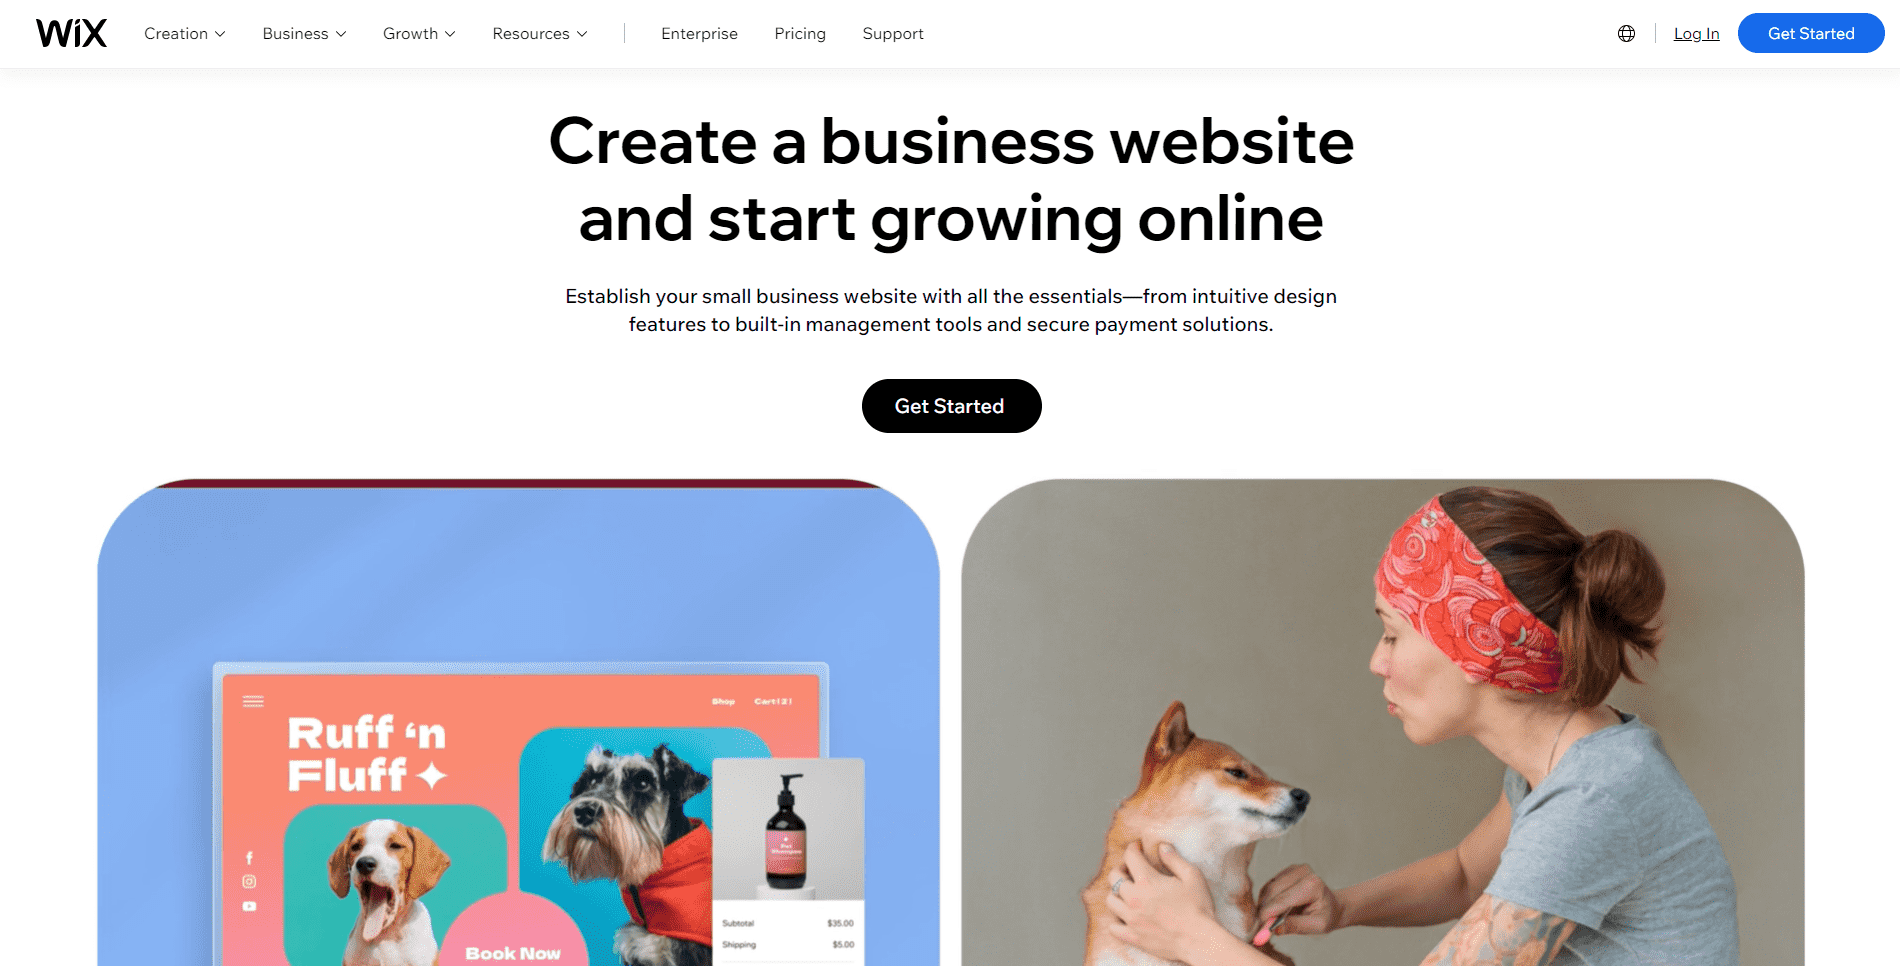 Wix "create a business website" page with example dog grooming images